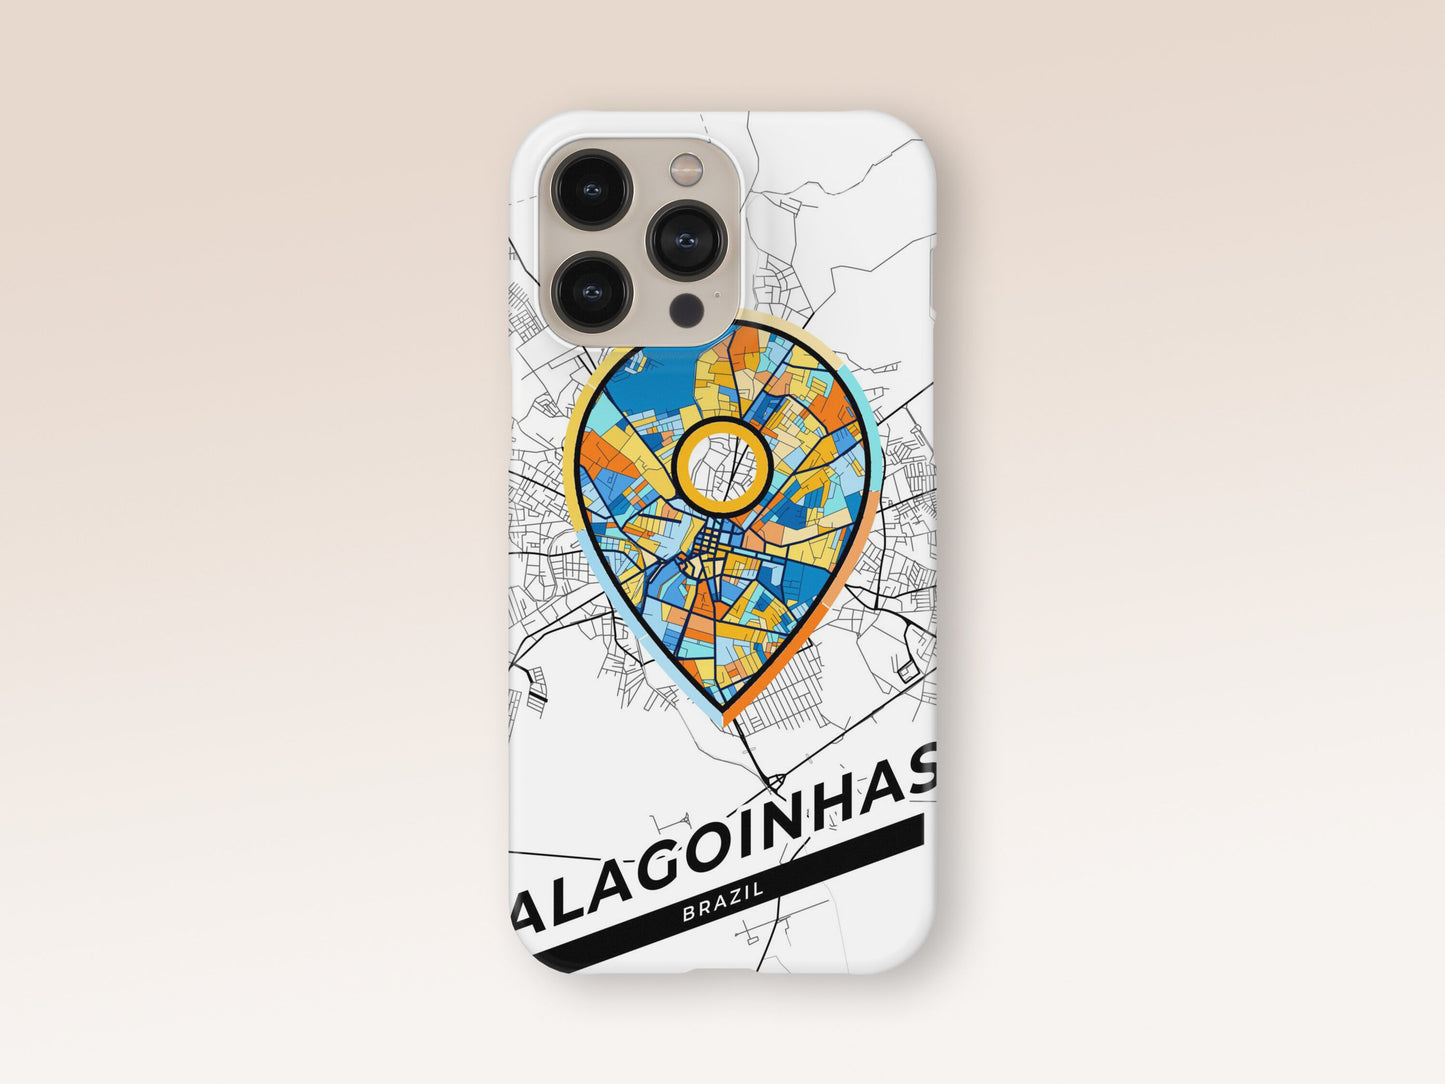 Alagoinhas Brazil slim phone case with colorful icon. Birthday, wedding or housewarming gift. Couple match cases. 1